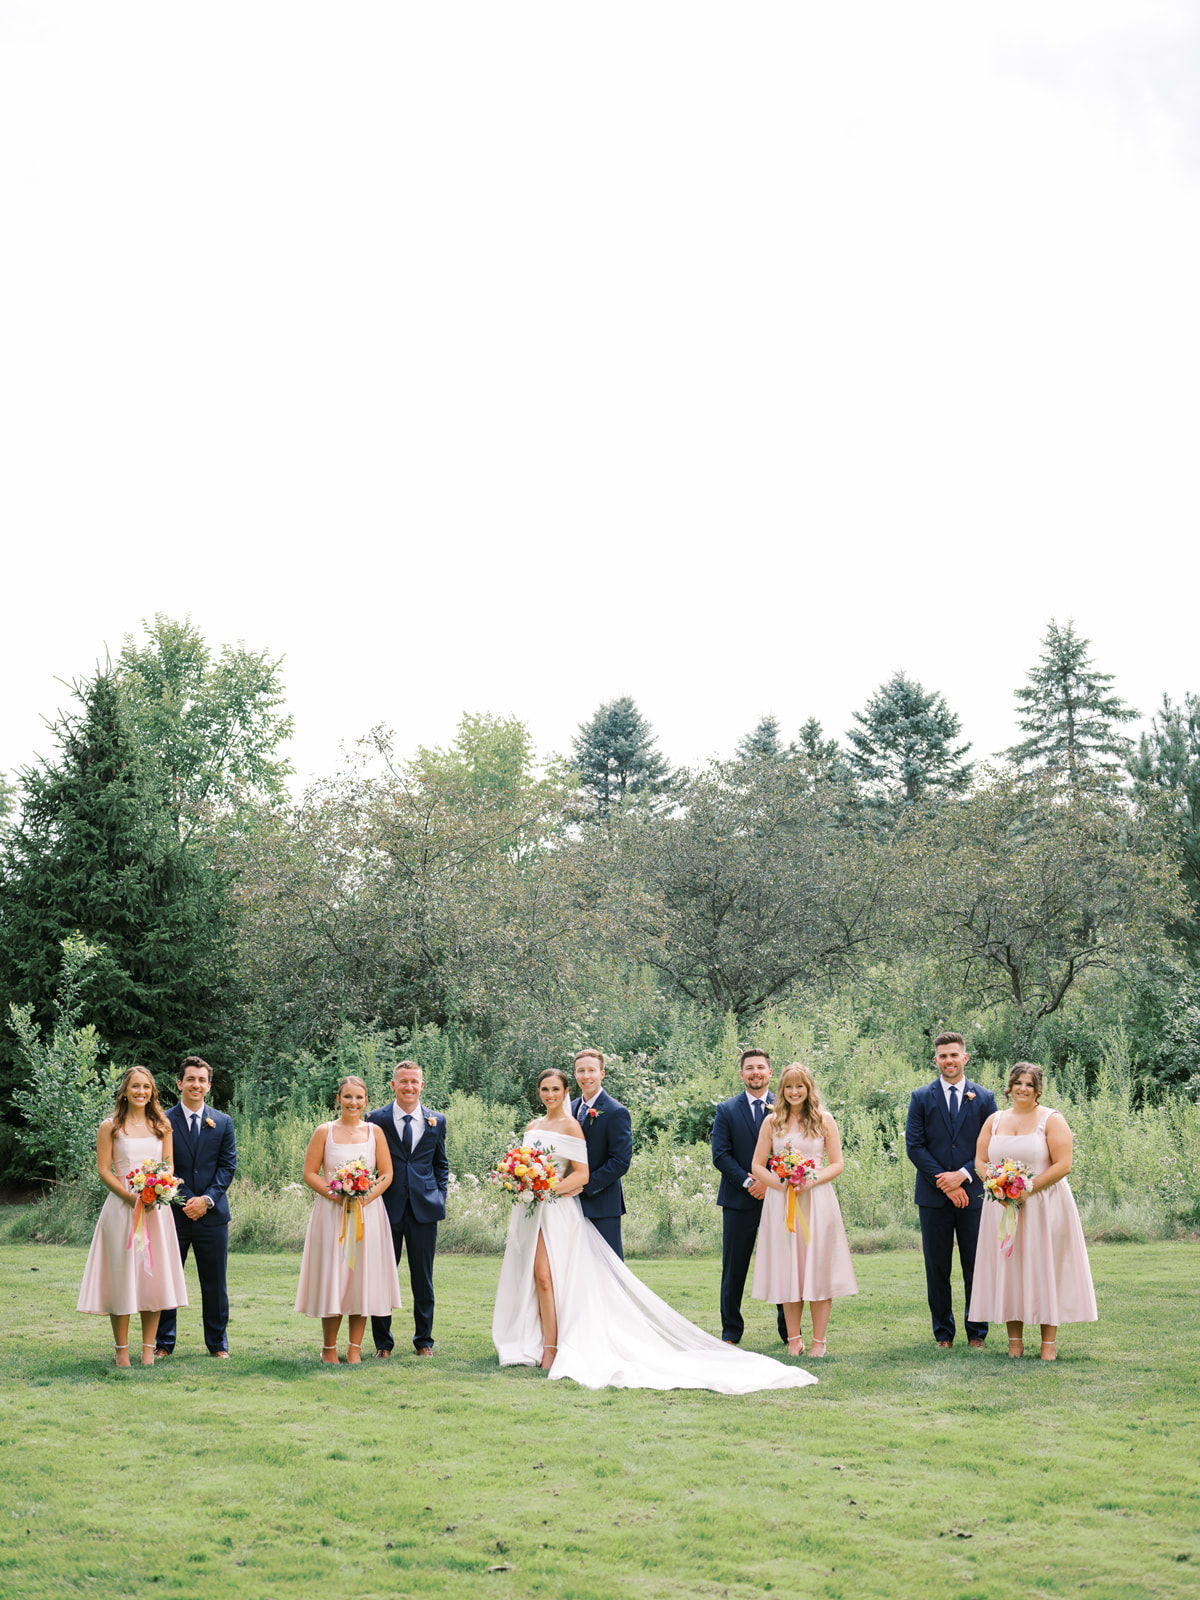 Orchid House Winery wedding portraits of bridal party